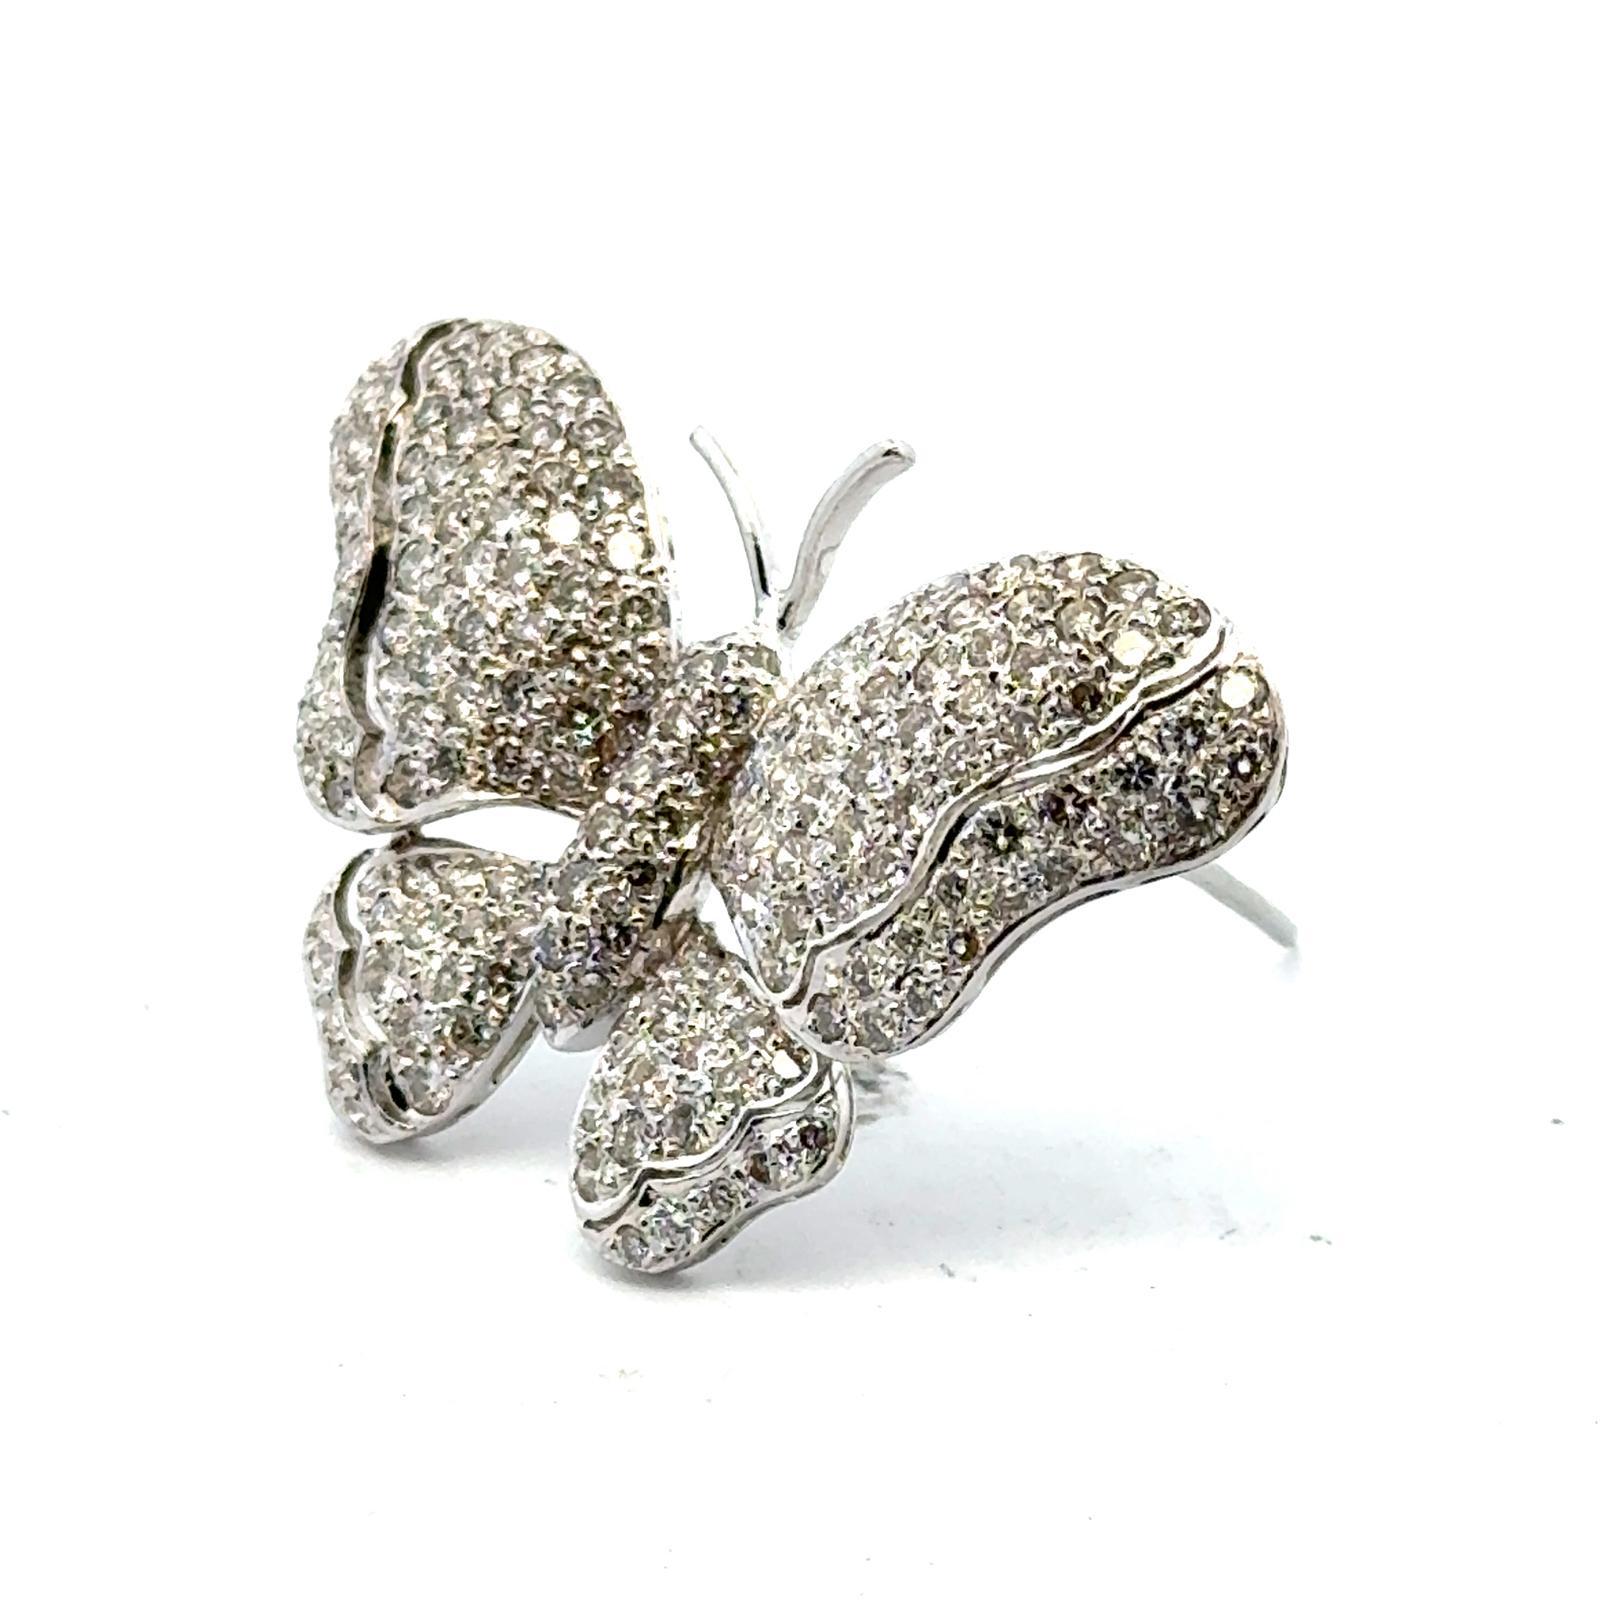 1970's diamond butterfly pendant and pin fashioned in 18 karat white gold. The butterfly features 180 round brilliant cut diamonds weighing approximately 3.50 carat total and are graded H-I color and SI clarity. The pendant measures 1.00 x 1.75